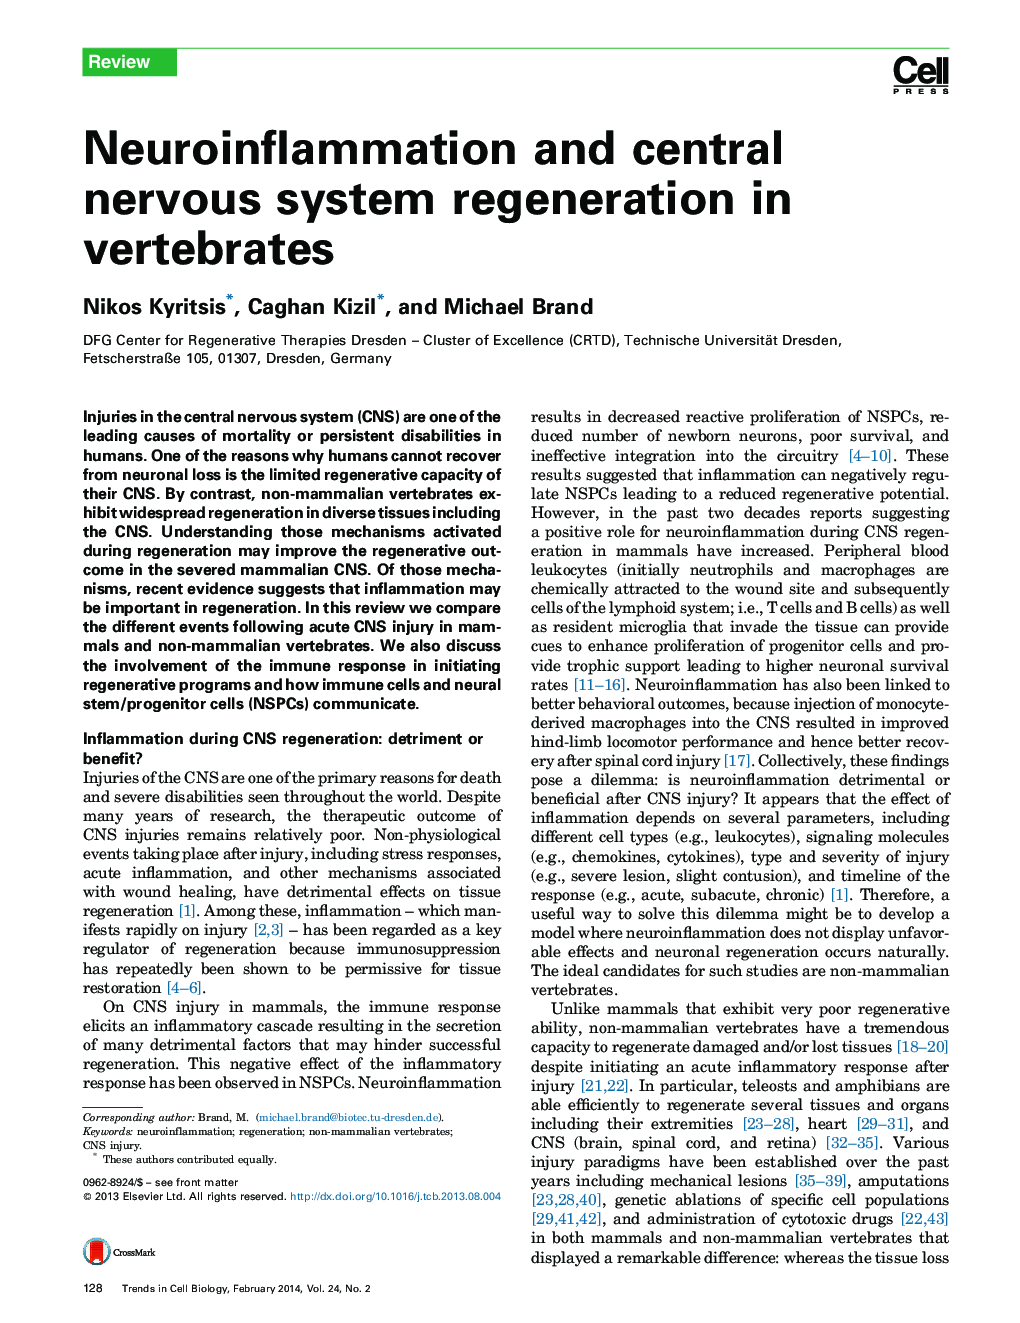 Neuroinflammation and central nervous system regeneration in vertebrates